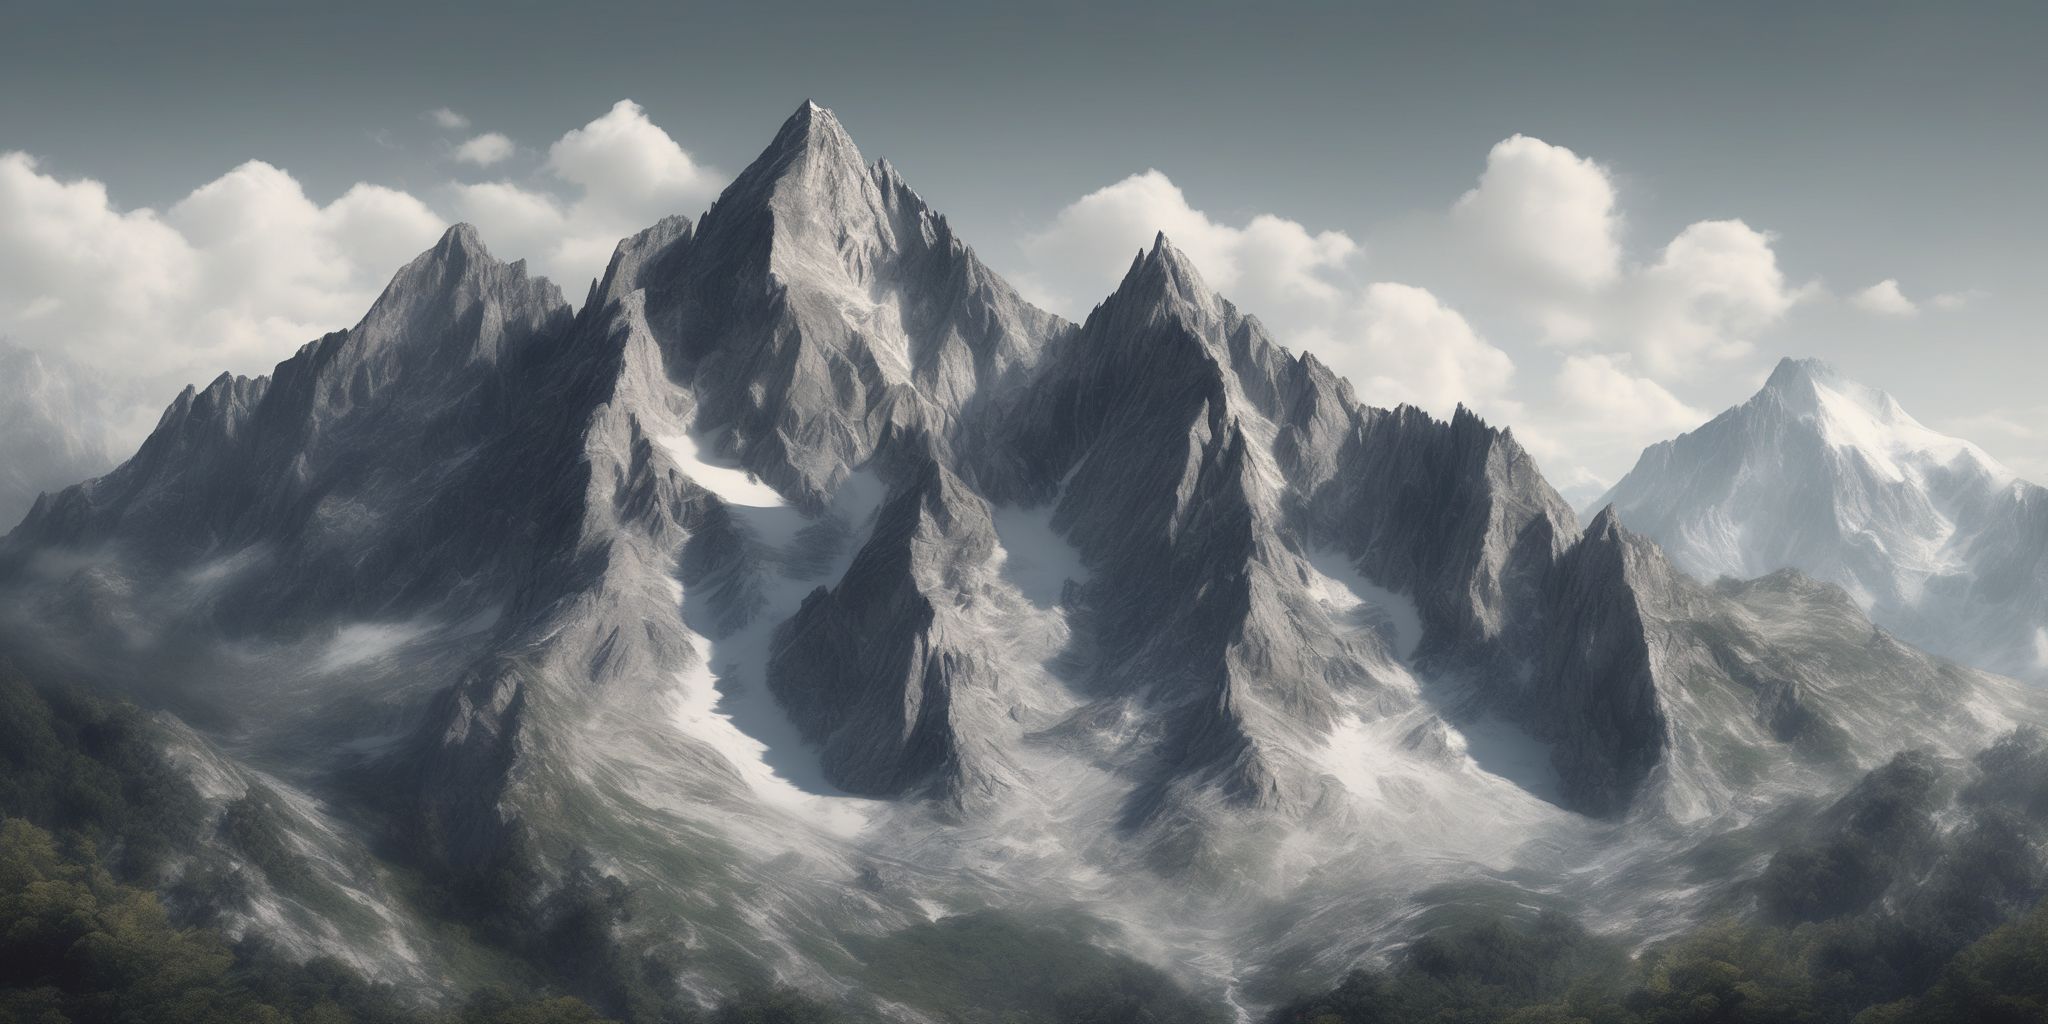 Mountain peak  in realistic, photographic style